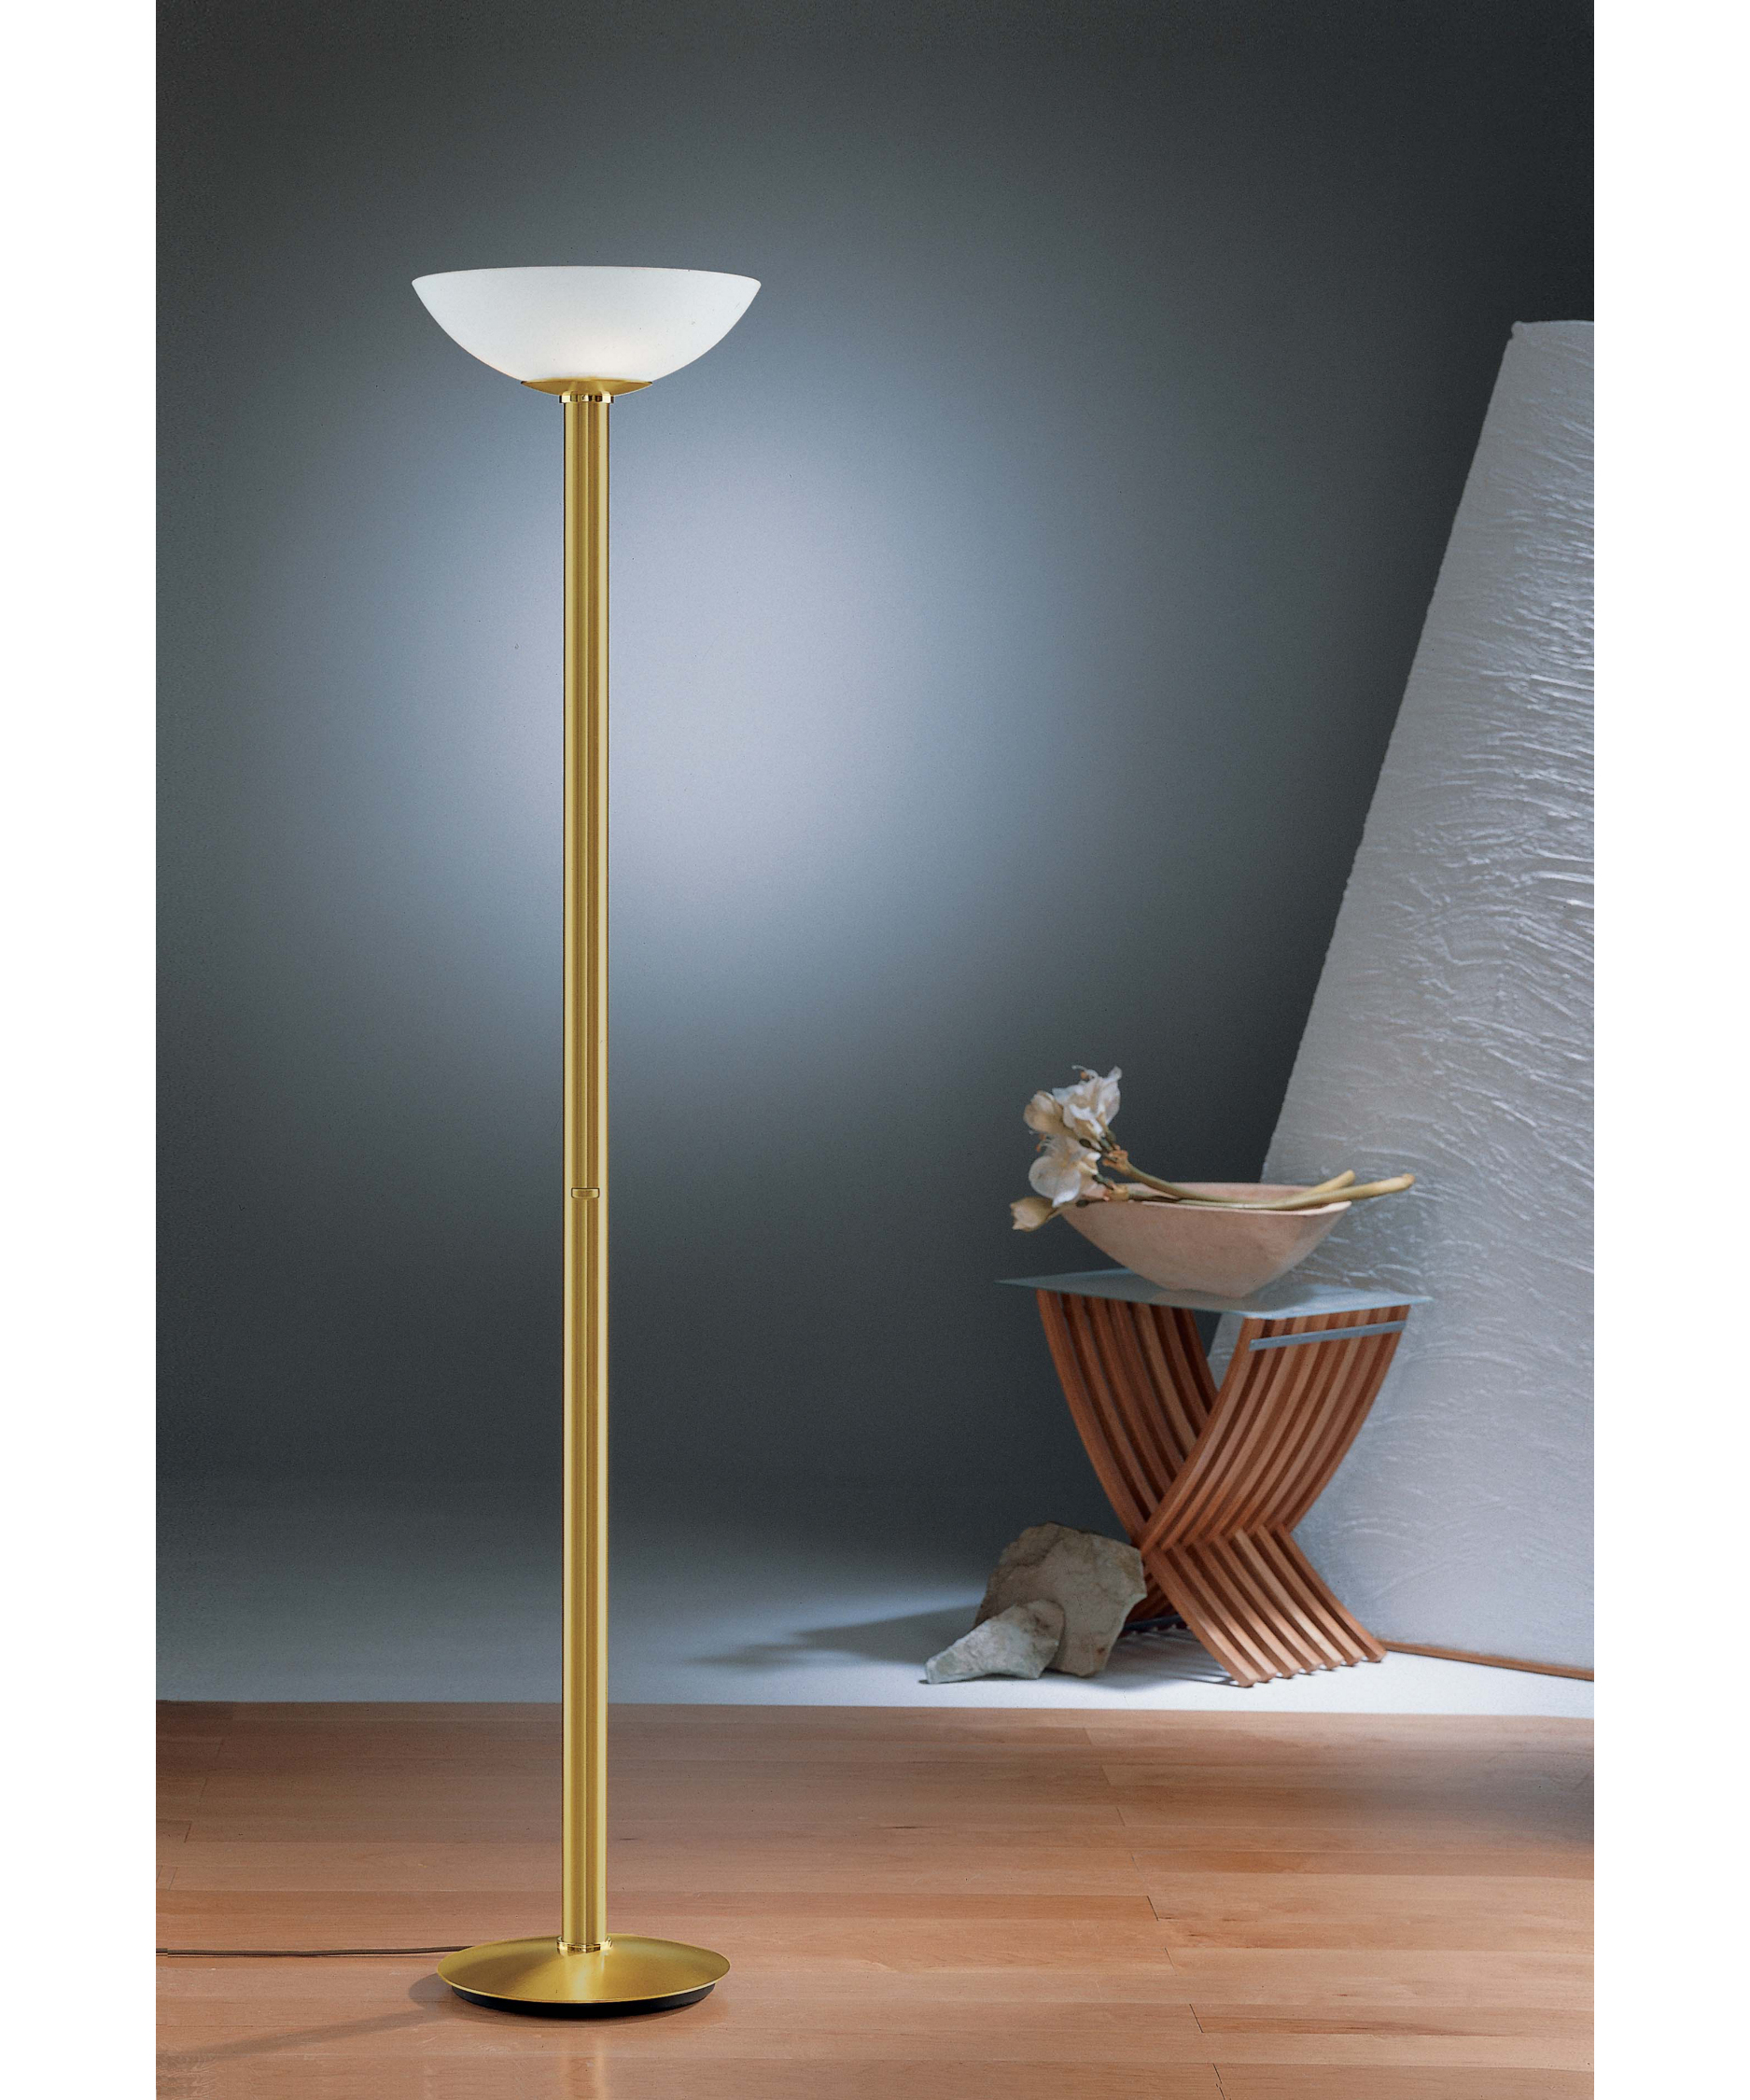 Penneys Floor Lamps Pixballcom Penneys Jcpenney Jc with proportions 1875 X 2250